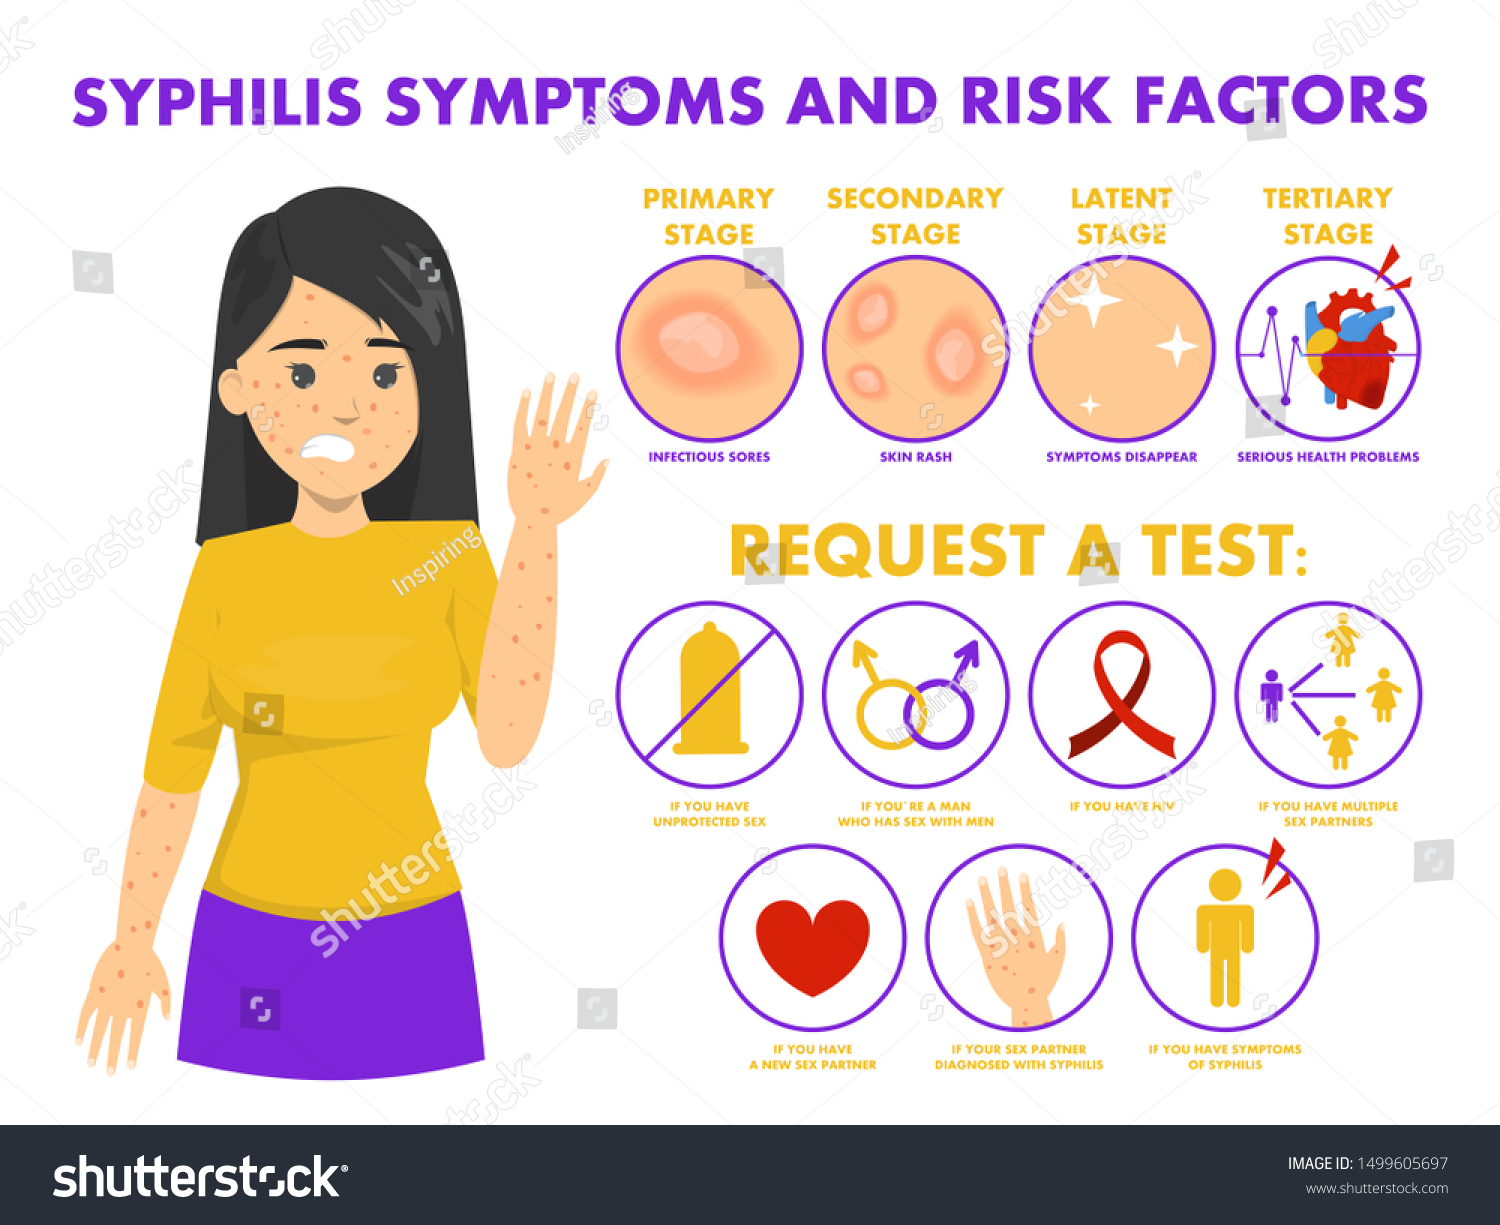 Syphilis Symptoms Risk Factor Infographic Dangerous Stock Vector Royalty Free 1499605697 